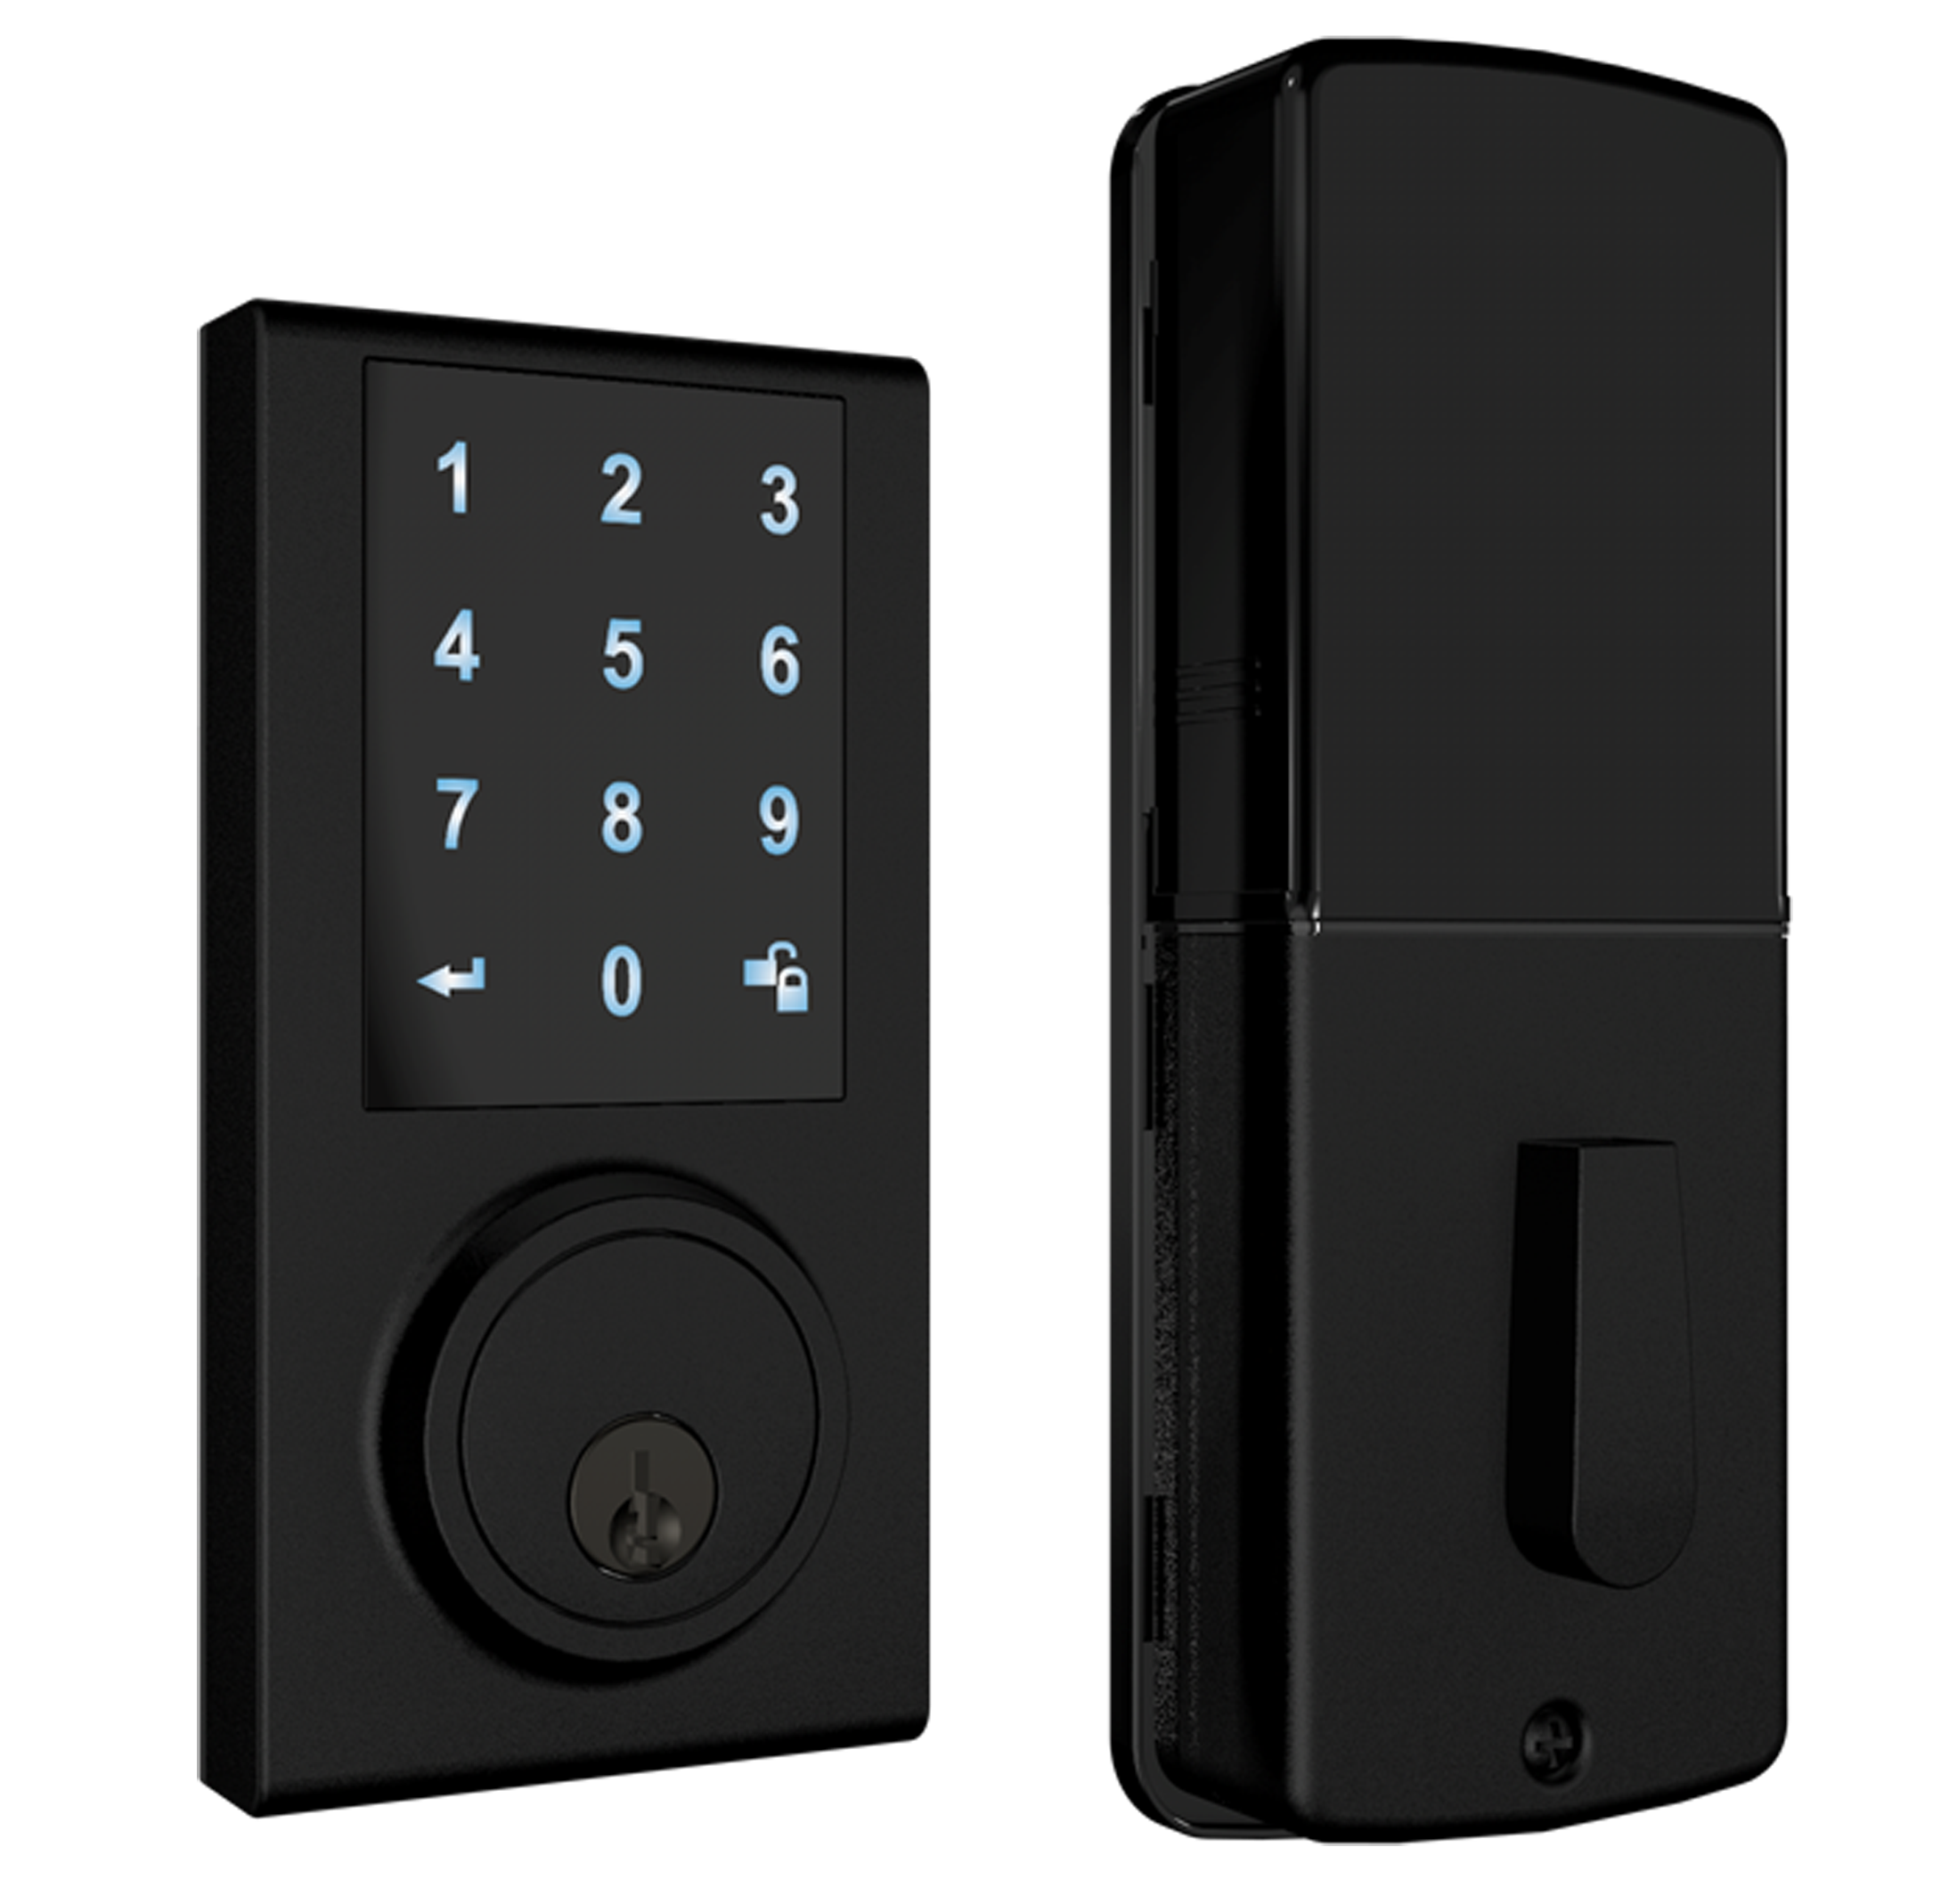 The super sleek Z-Wave (ZW300) Touchscreen Smartlock is available in four finishes, including stylish new matte black.